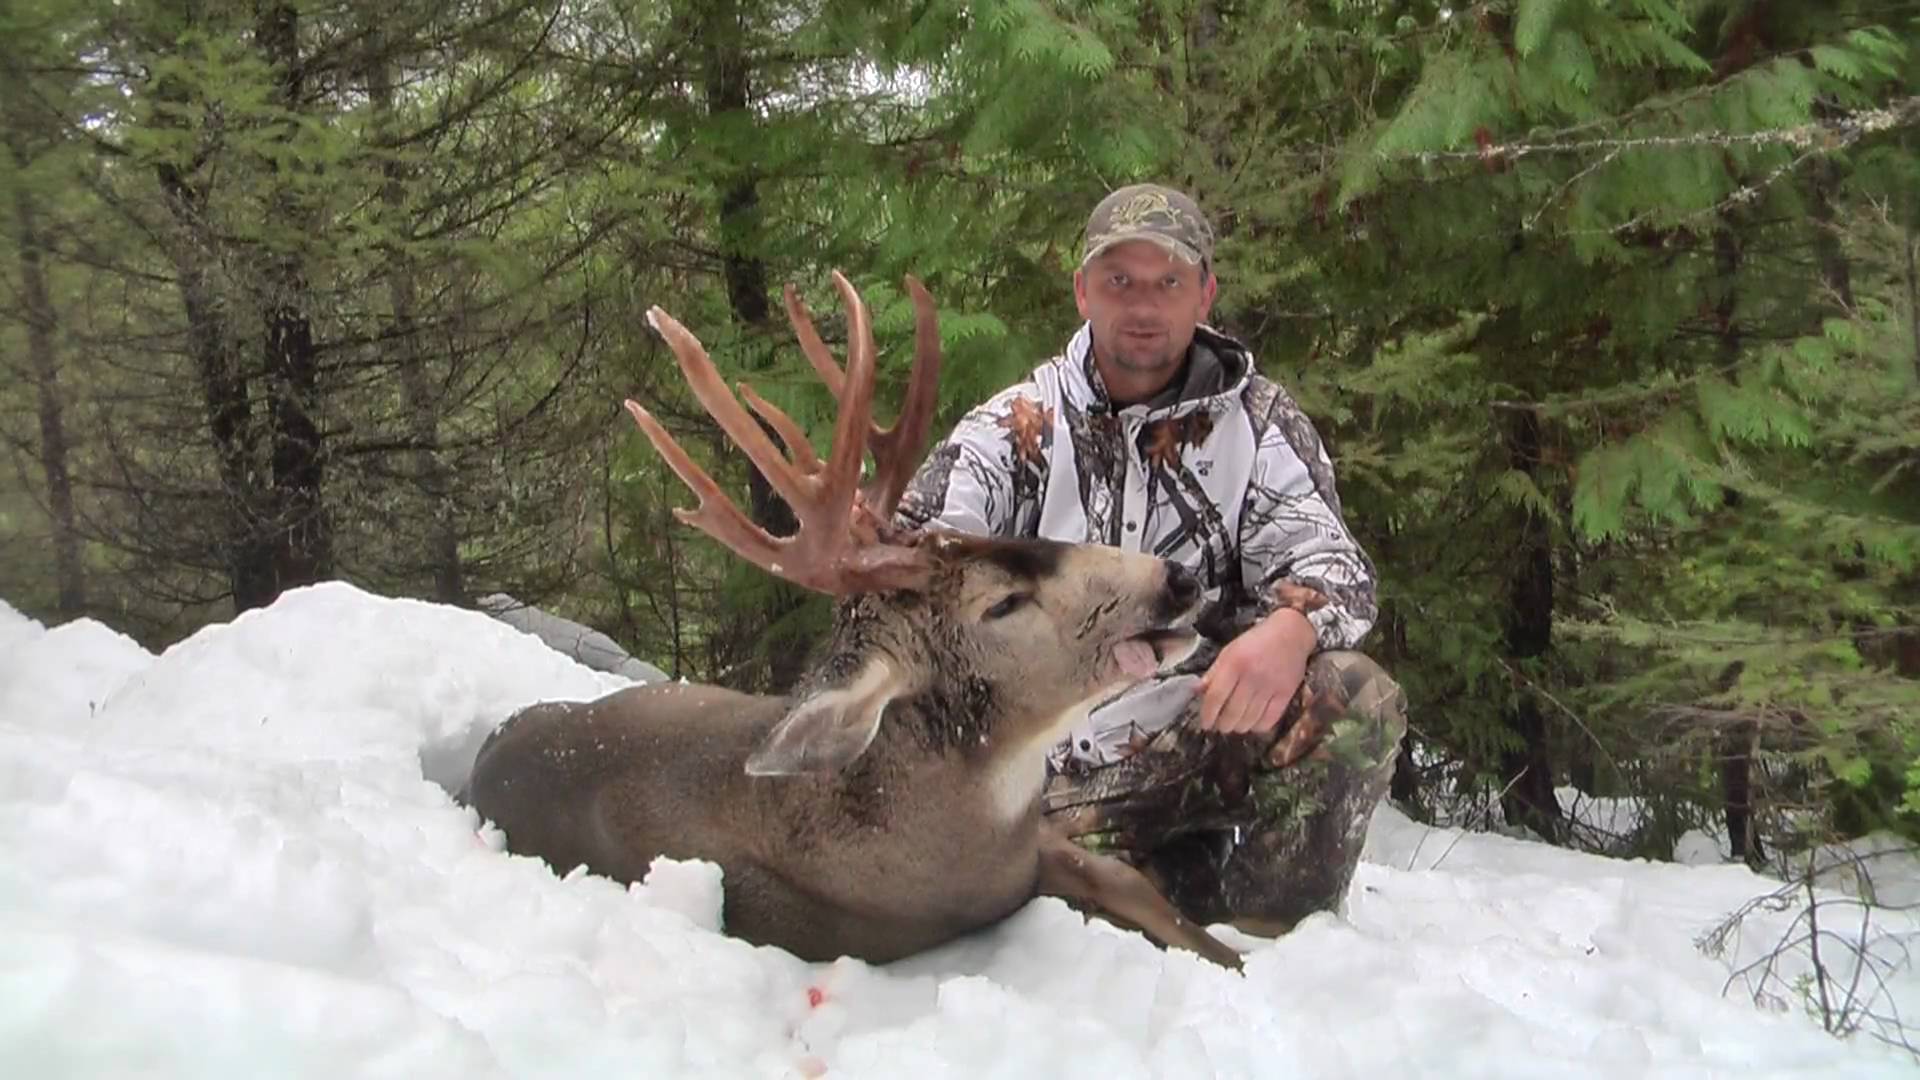 huge record book blacktail deer Howtohunt.com,follow on FB - YouTube